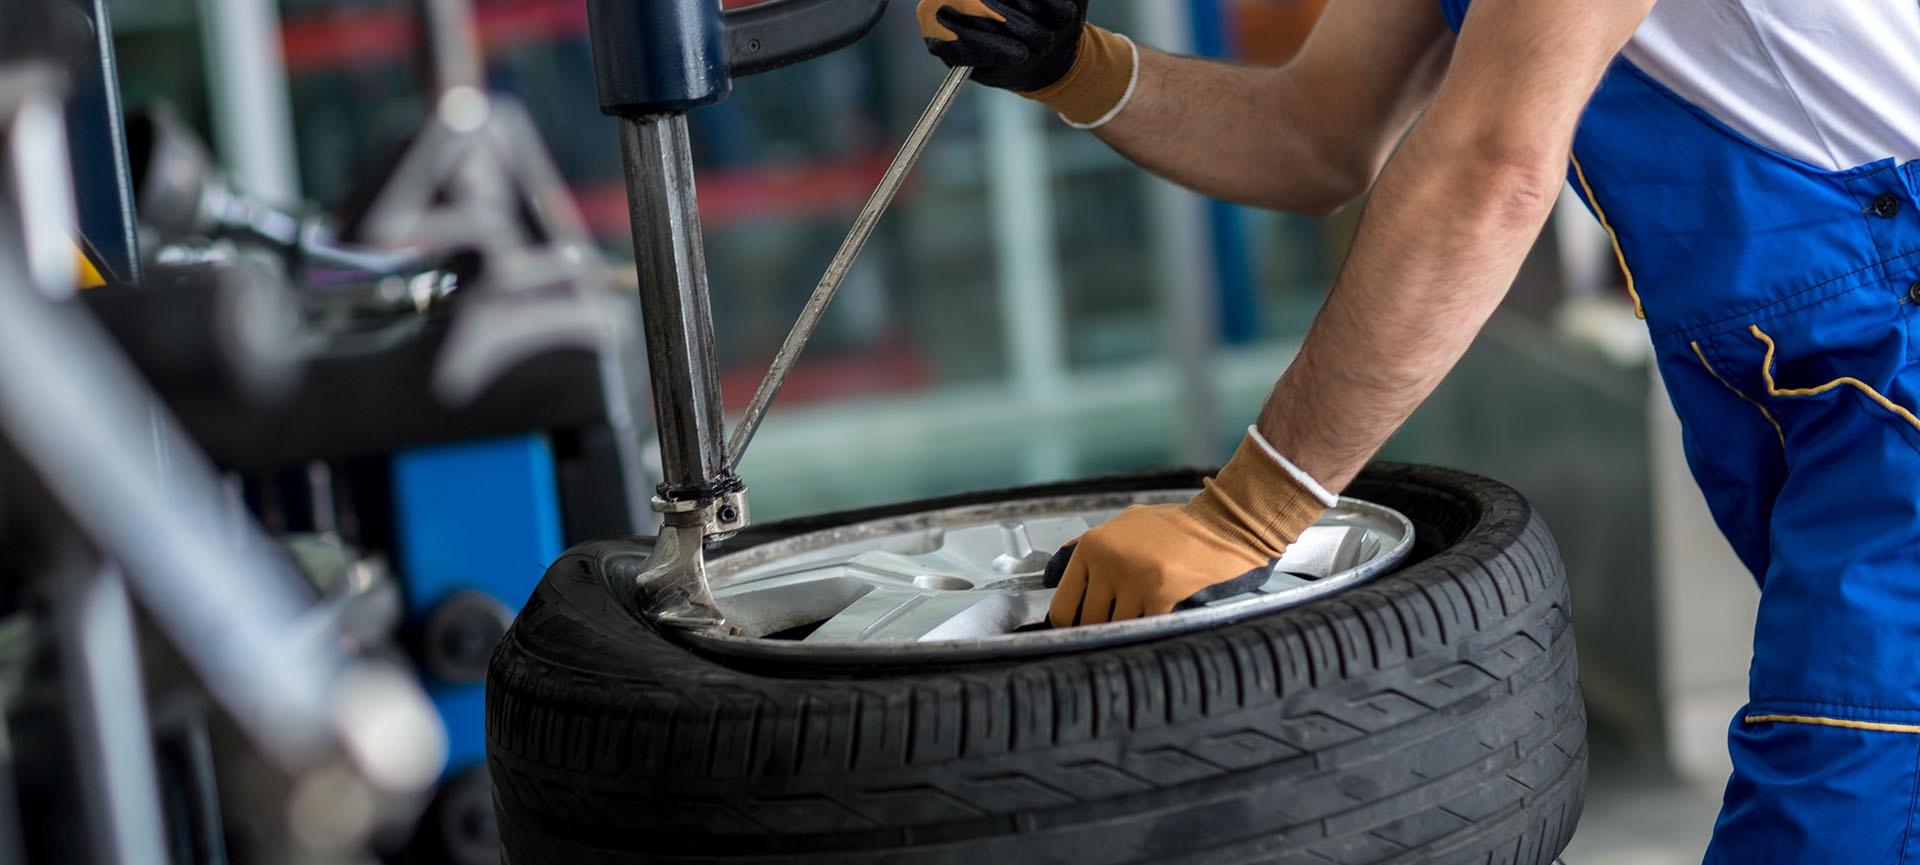 What Should I Know About Wheel Repair?